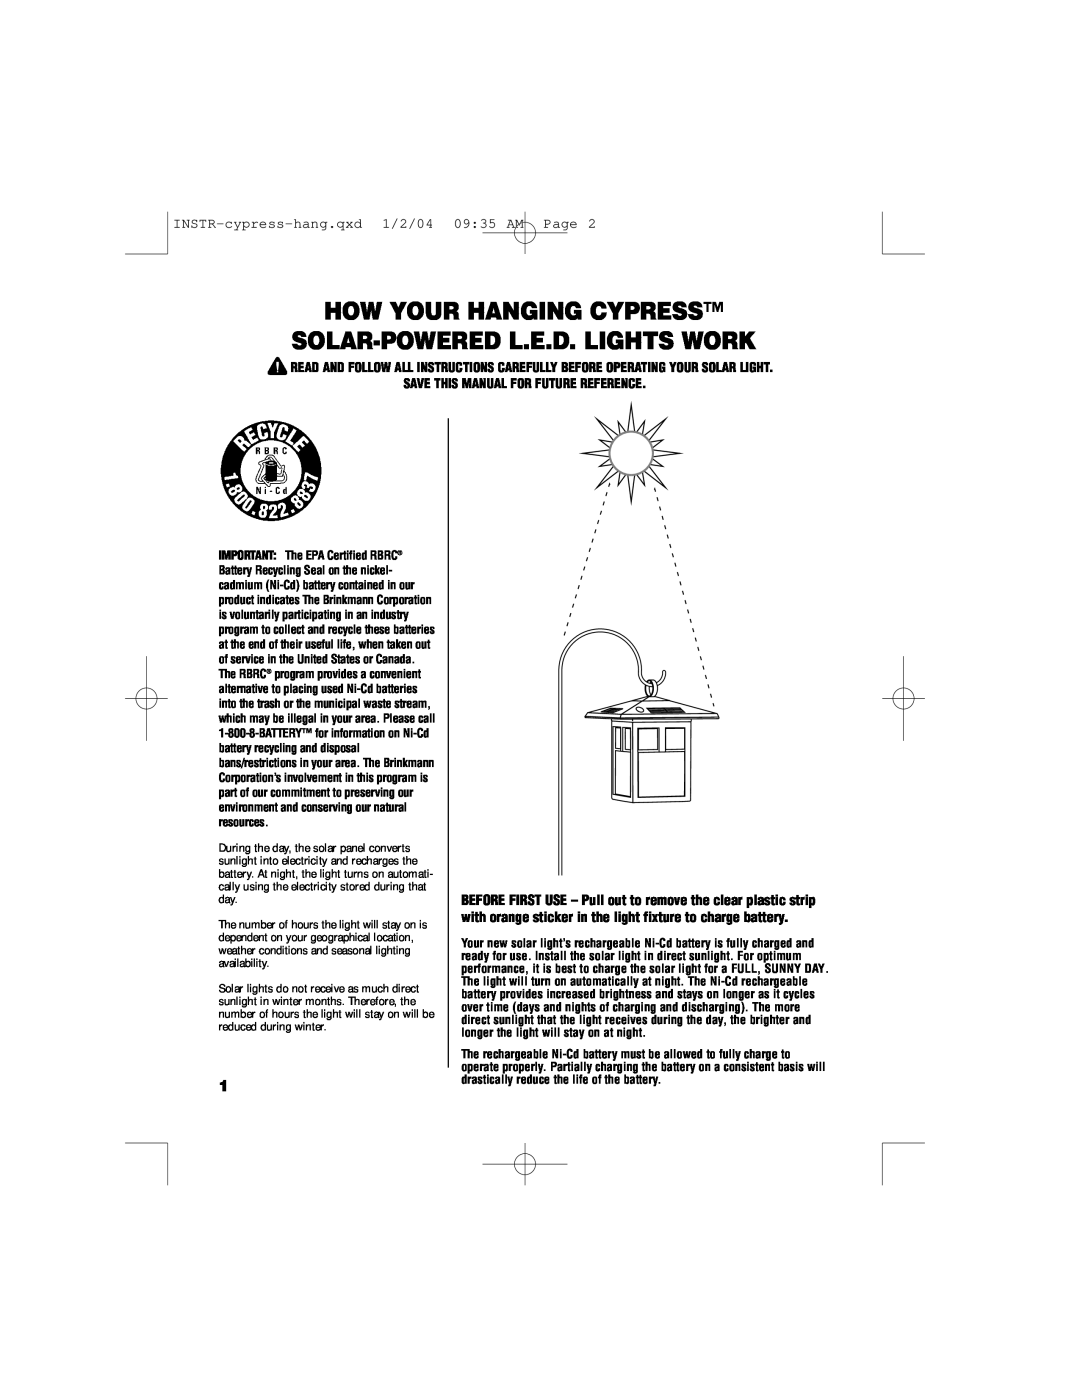 Brinkmann 822-1526-2 How Your Hanging Cypress, Solar-Poweredl.E.D. Lights Work, Save This Manual For Future Reference 